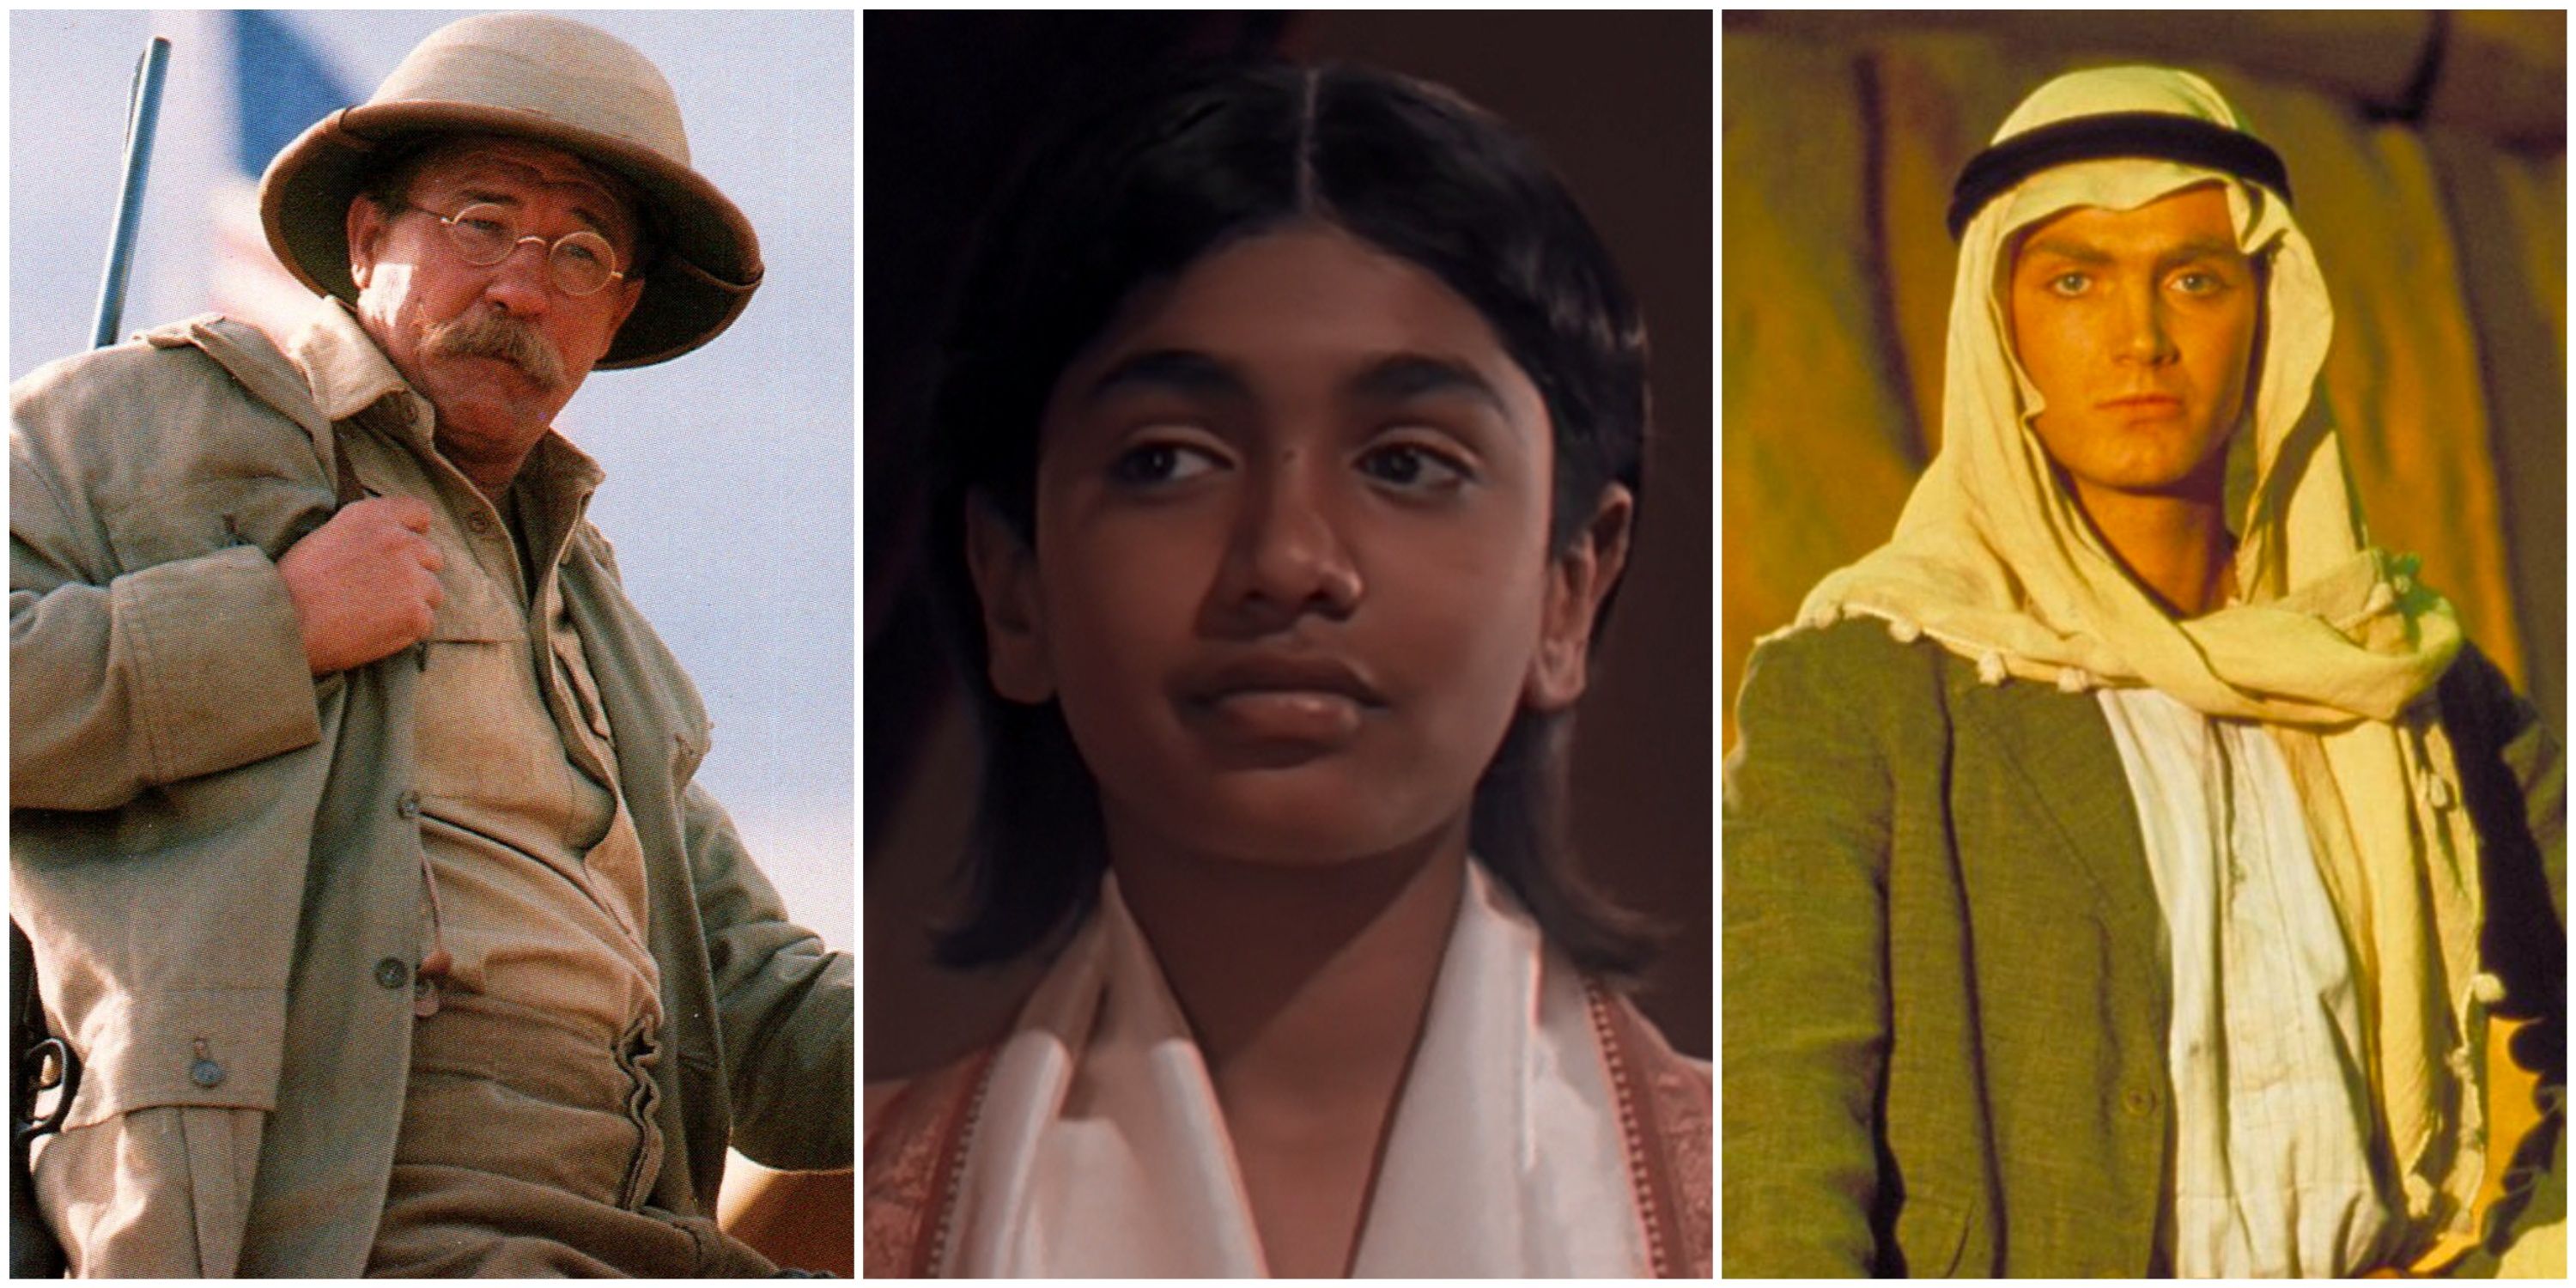 Teddy Roosevelt, Krishnamurti, and T.E. Lawrence in The Young Indiana Jones Chronicles